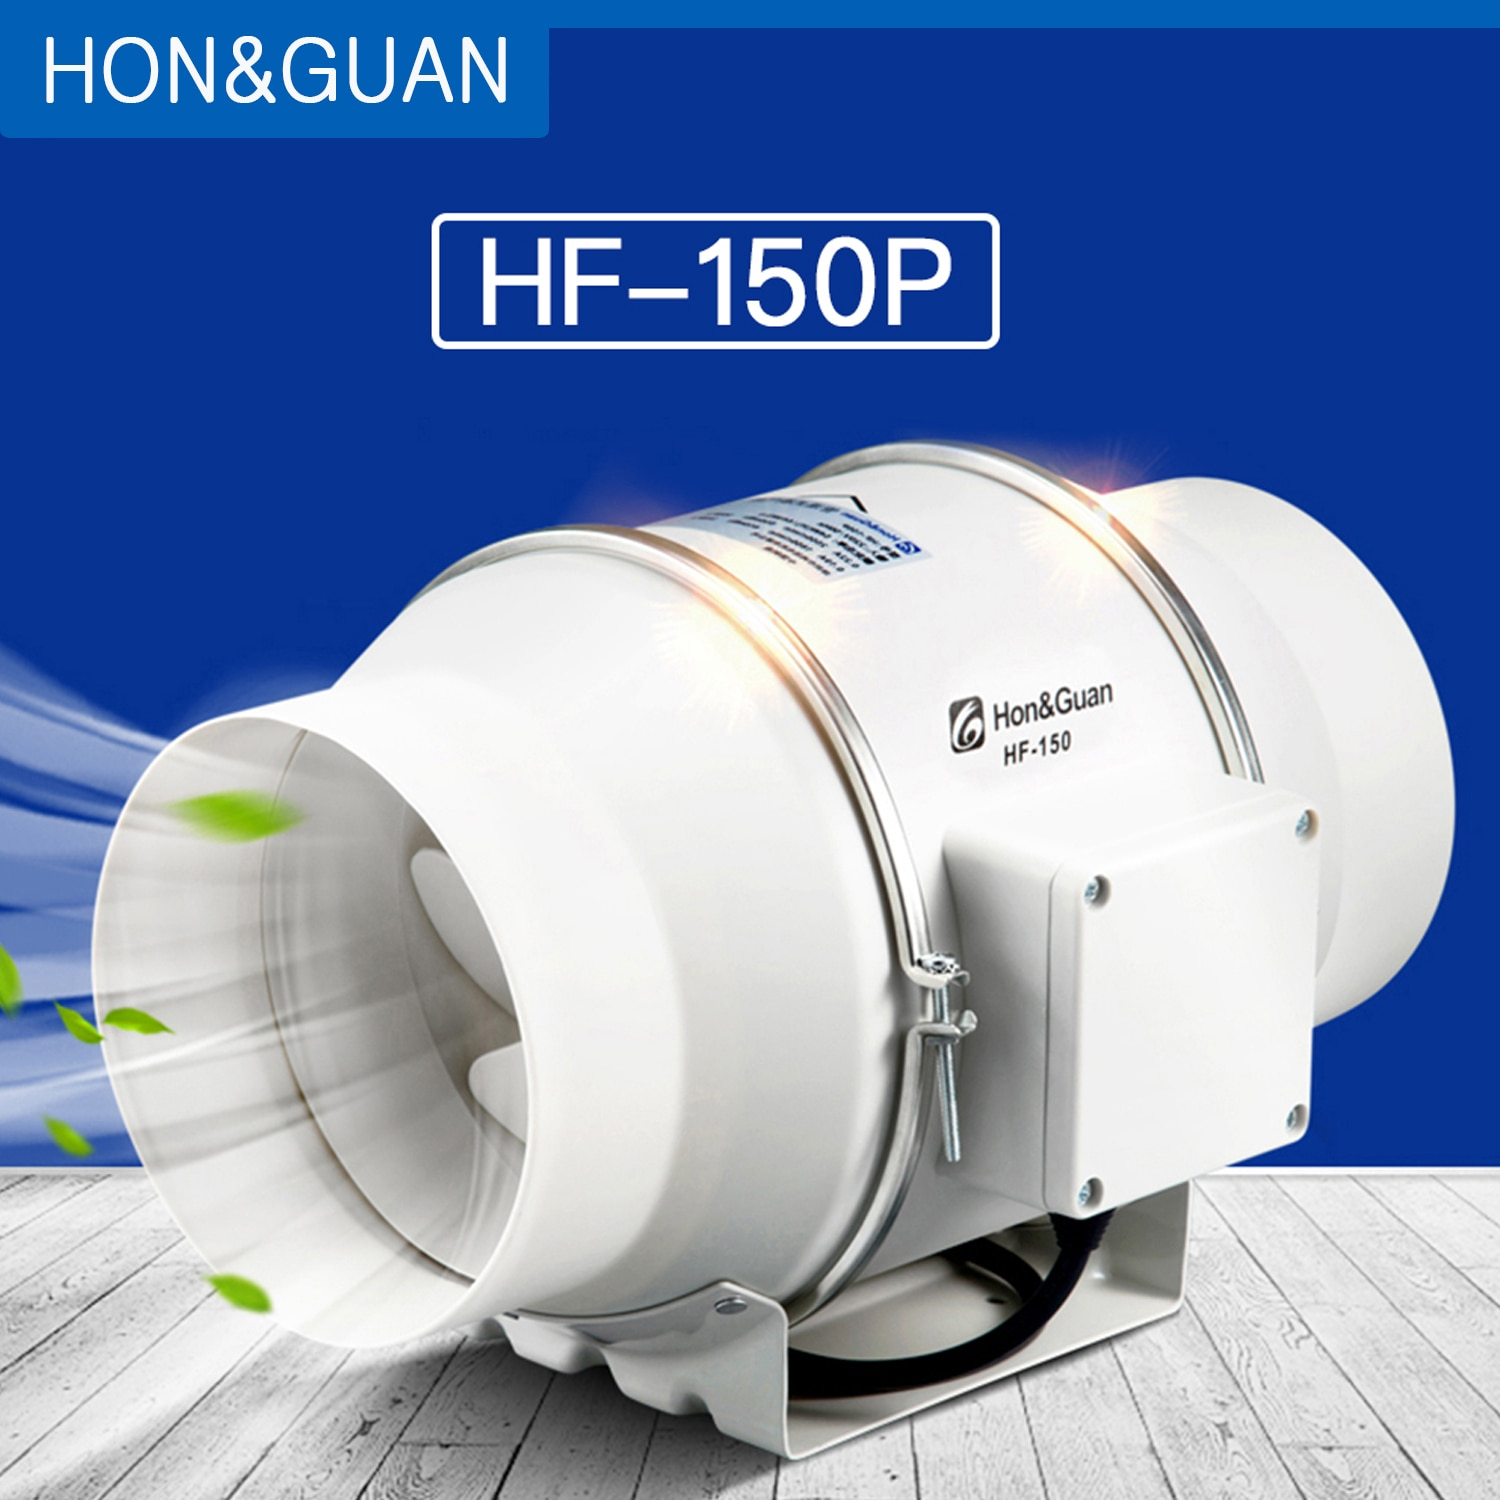 Us 10119 8 Offhonguan 6 Inline Duct Fan Exhaust Fan Mixed Flow Inline Fan Hydroponic Air Blower For Home Ventilation Bathroom Vent 312 with sizing 1500 X 1500